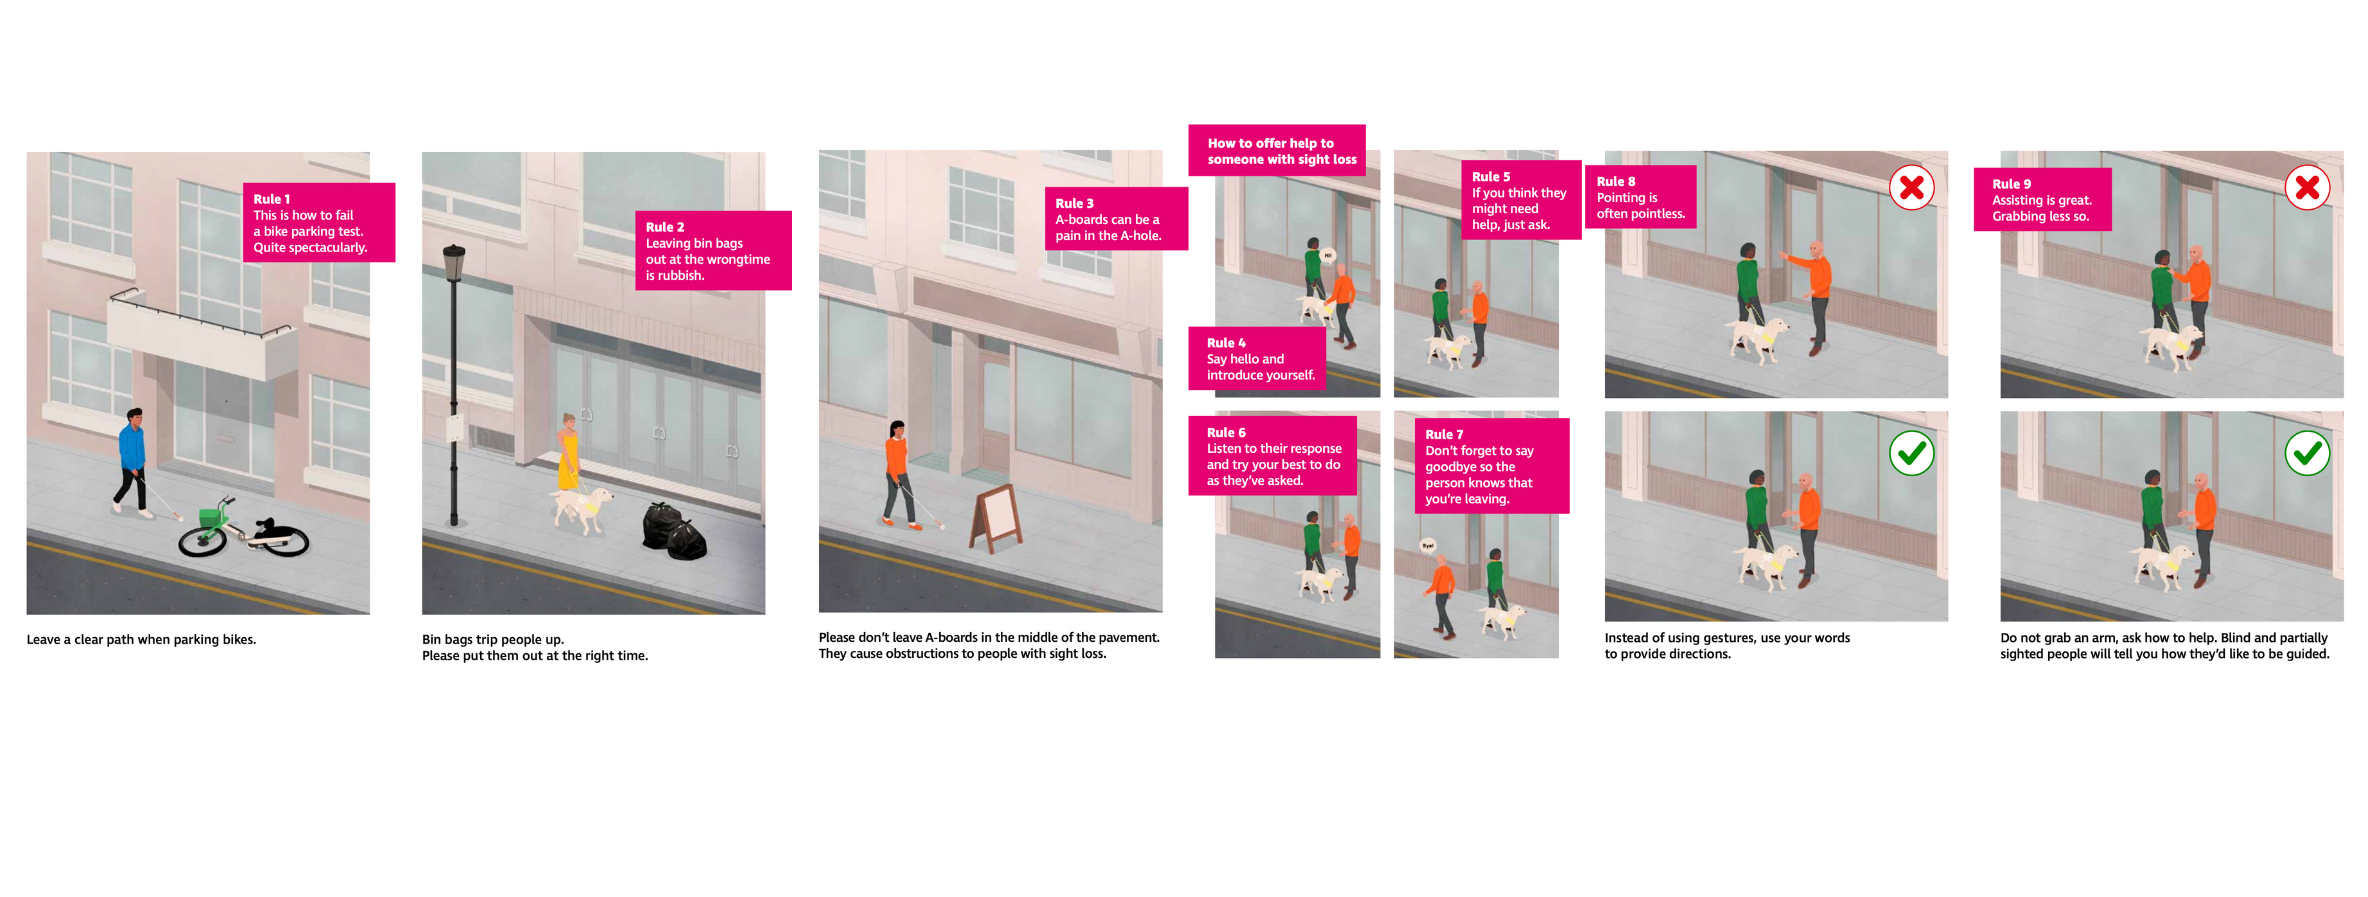 Images from the pavement code booklet. Rule 1 says "This is how to fail a bike parking test. Quite spectacularly. Leave a clear path when parking bikes." The illustration is of a man with a cane about to walk into a bike that had been left on the ground. Rule 2 says "Leaving bin bags out at the wrong time is rubbish. Bin bags trip people up. Please put them out at the right time." The illustration is of a women with a guide dog about to walk into 2 rubbish bags left in the middle of the pavement. Rule 3 says "A boards can be a pain in the A hole. Please don't leave A-boards in the middle of the pavement. They cause obstructions to people with sight loss." The illustration is of a women with a white cane about to walk into an A-board left in the middle of the pavement. The next page is called "How to offer help to someone with sight loss". There is an illustrated example of an interaction between a man and woman with a guide dog. Rule 4 says "Say hello and introduce yourself". Rule 5 says "If you think they might need help, just ask." Rule 6 says "Listen to their response and try your best to do as they've asked". Rule 7 says "Don't forget to say goodbye so the person knows that you're leaving". Rule 8 says "Pointing is often pointless. Instead of using gestures, use your words to provide directions." There is an illustration of someone point with a red cross next to it, and someone giving verbal directions with a tick next to it. 